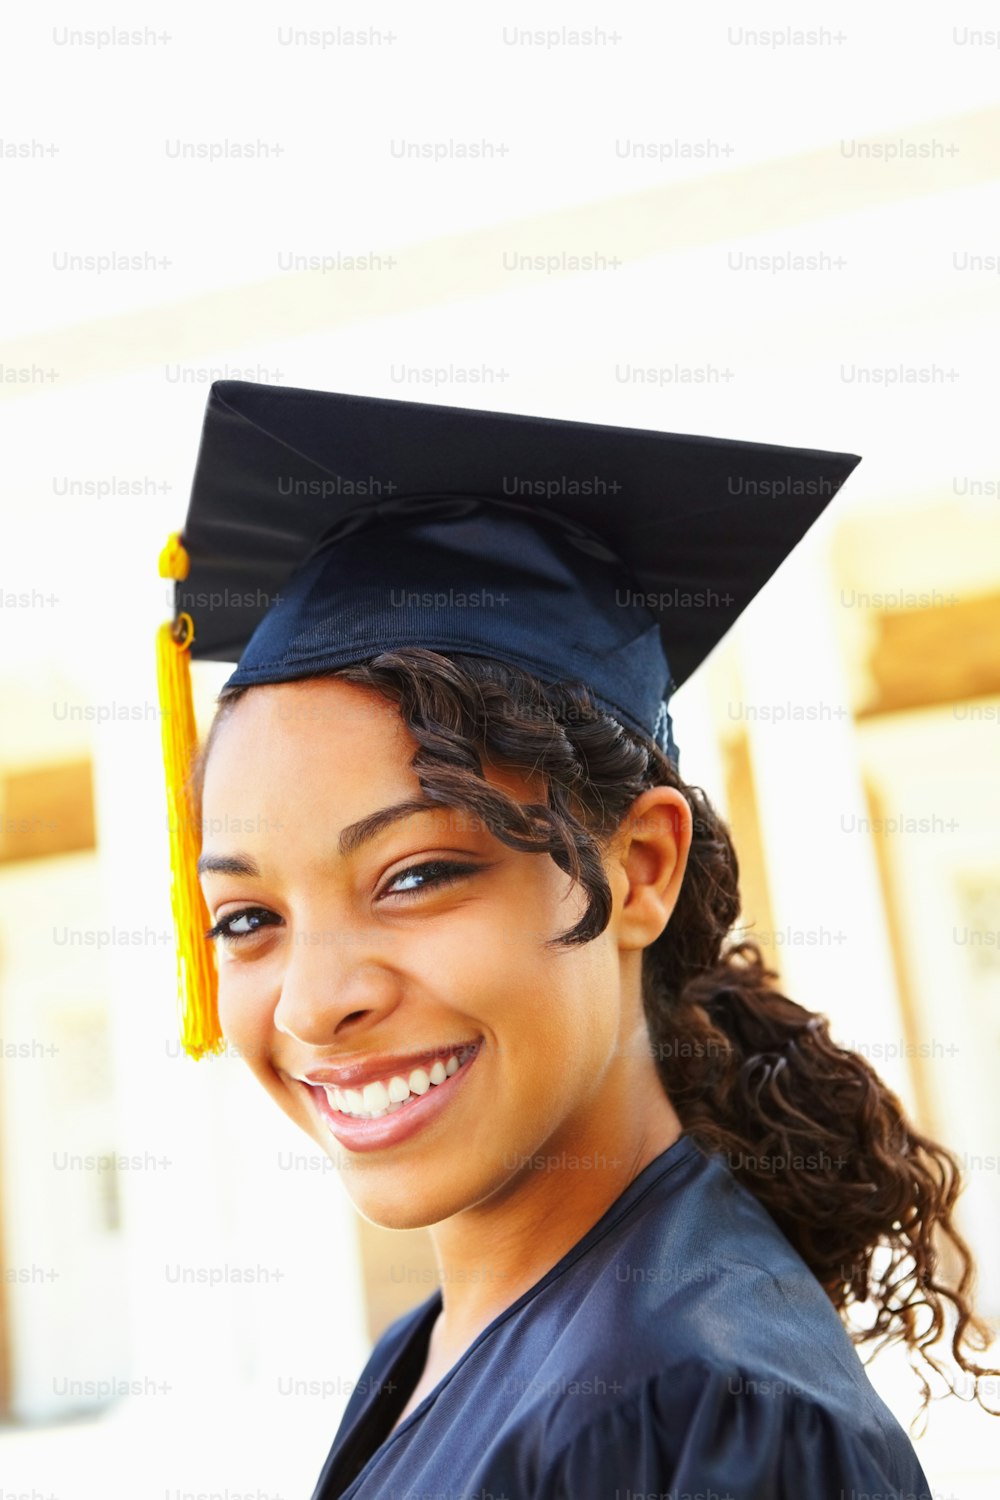 Closeup of smiling young girl in an academic gown